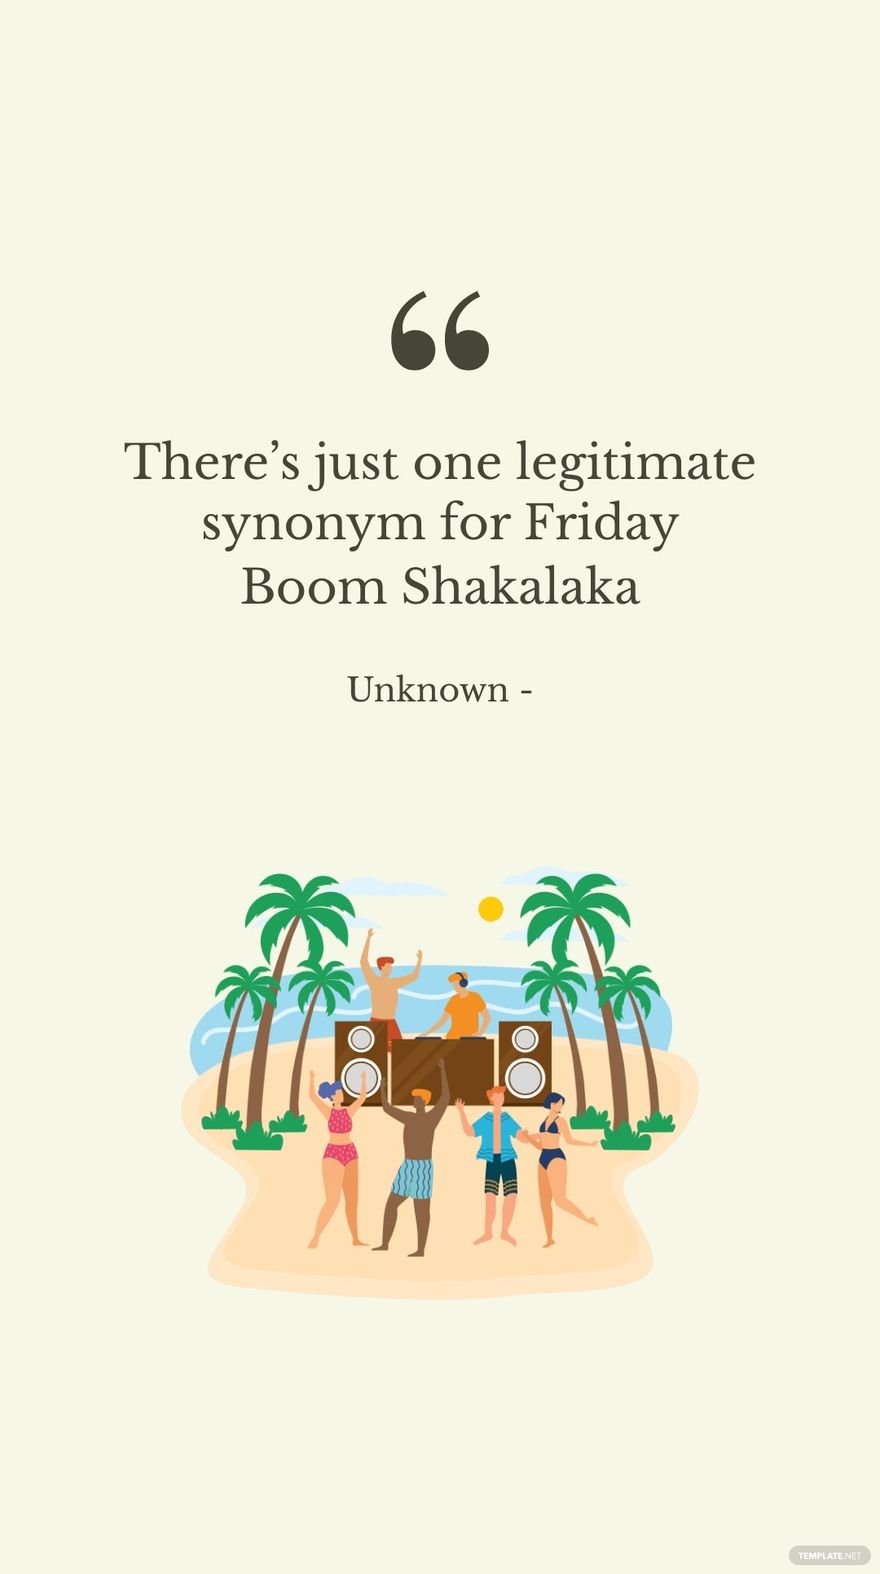 Unknown - There’s just one legitimate synonym for Friday Boom Shakalaka 